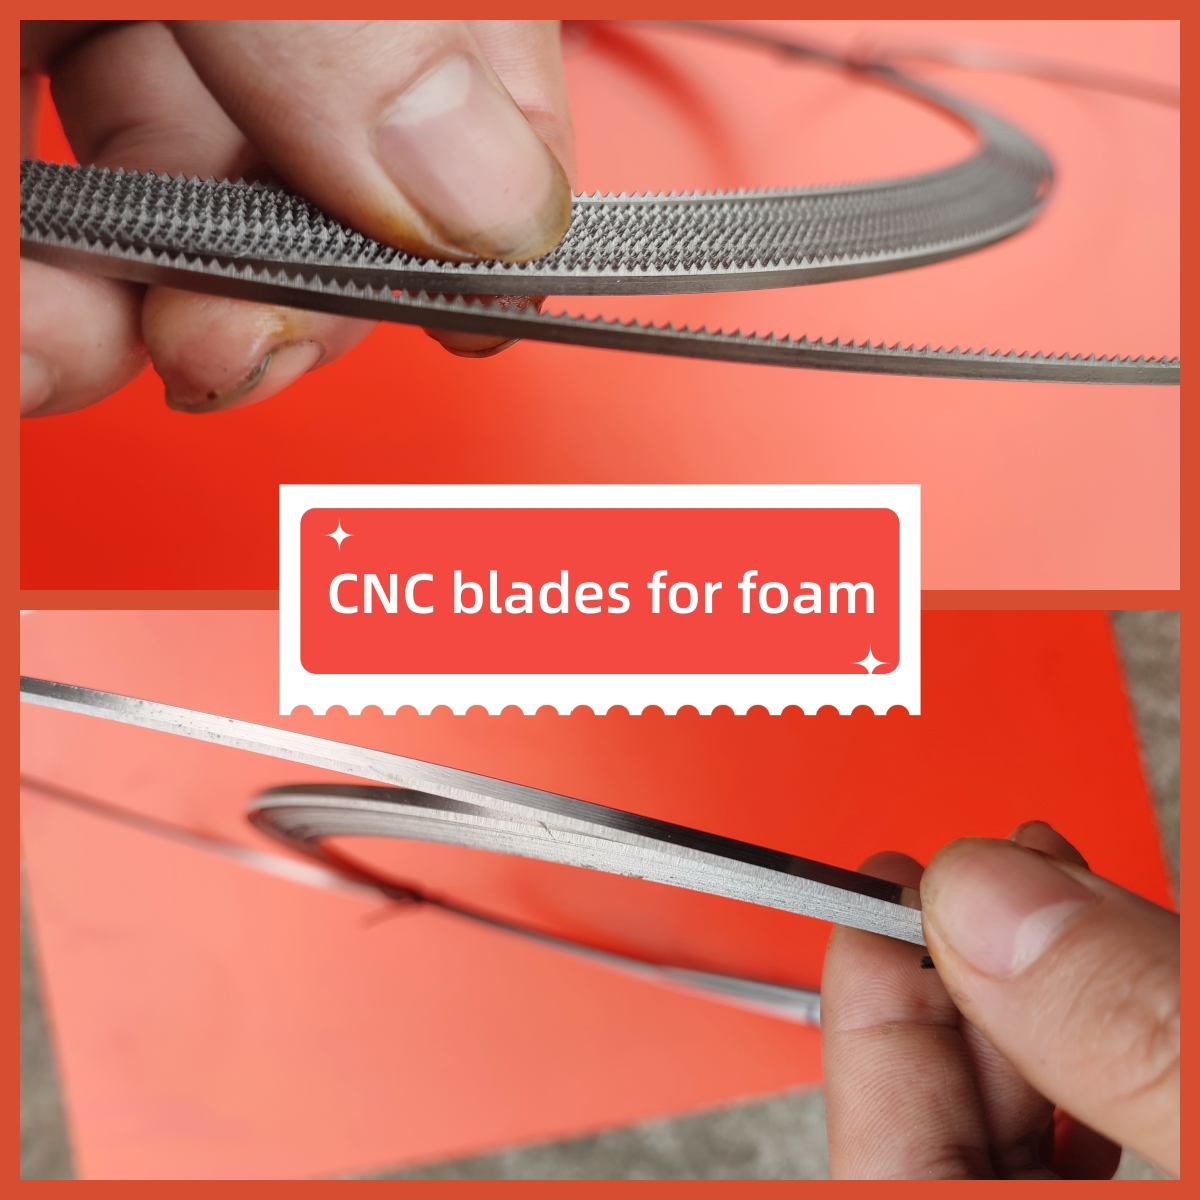 CNC Bandknives Blades: The Key to Efficient and Waste-Free Foam Cutting